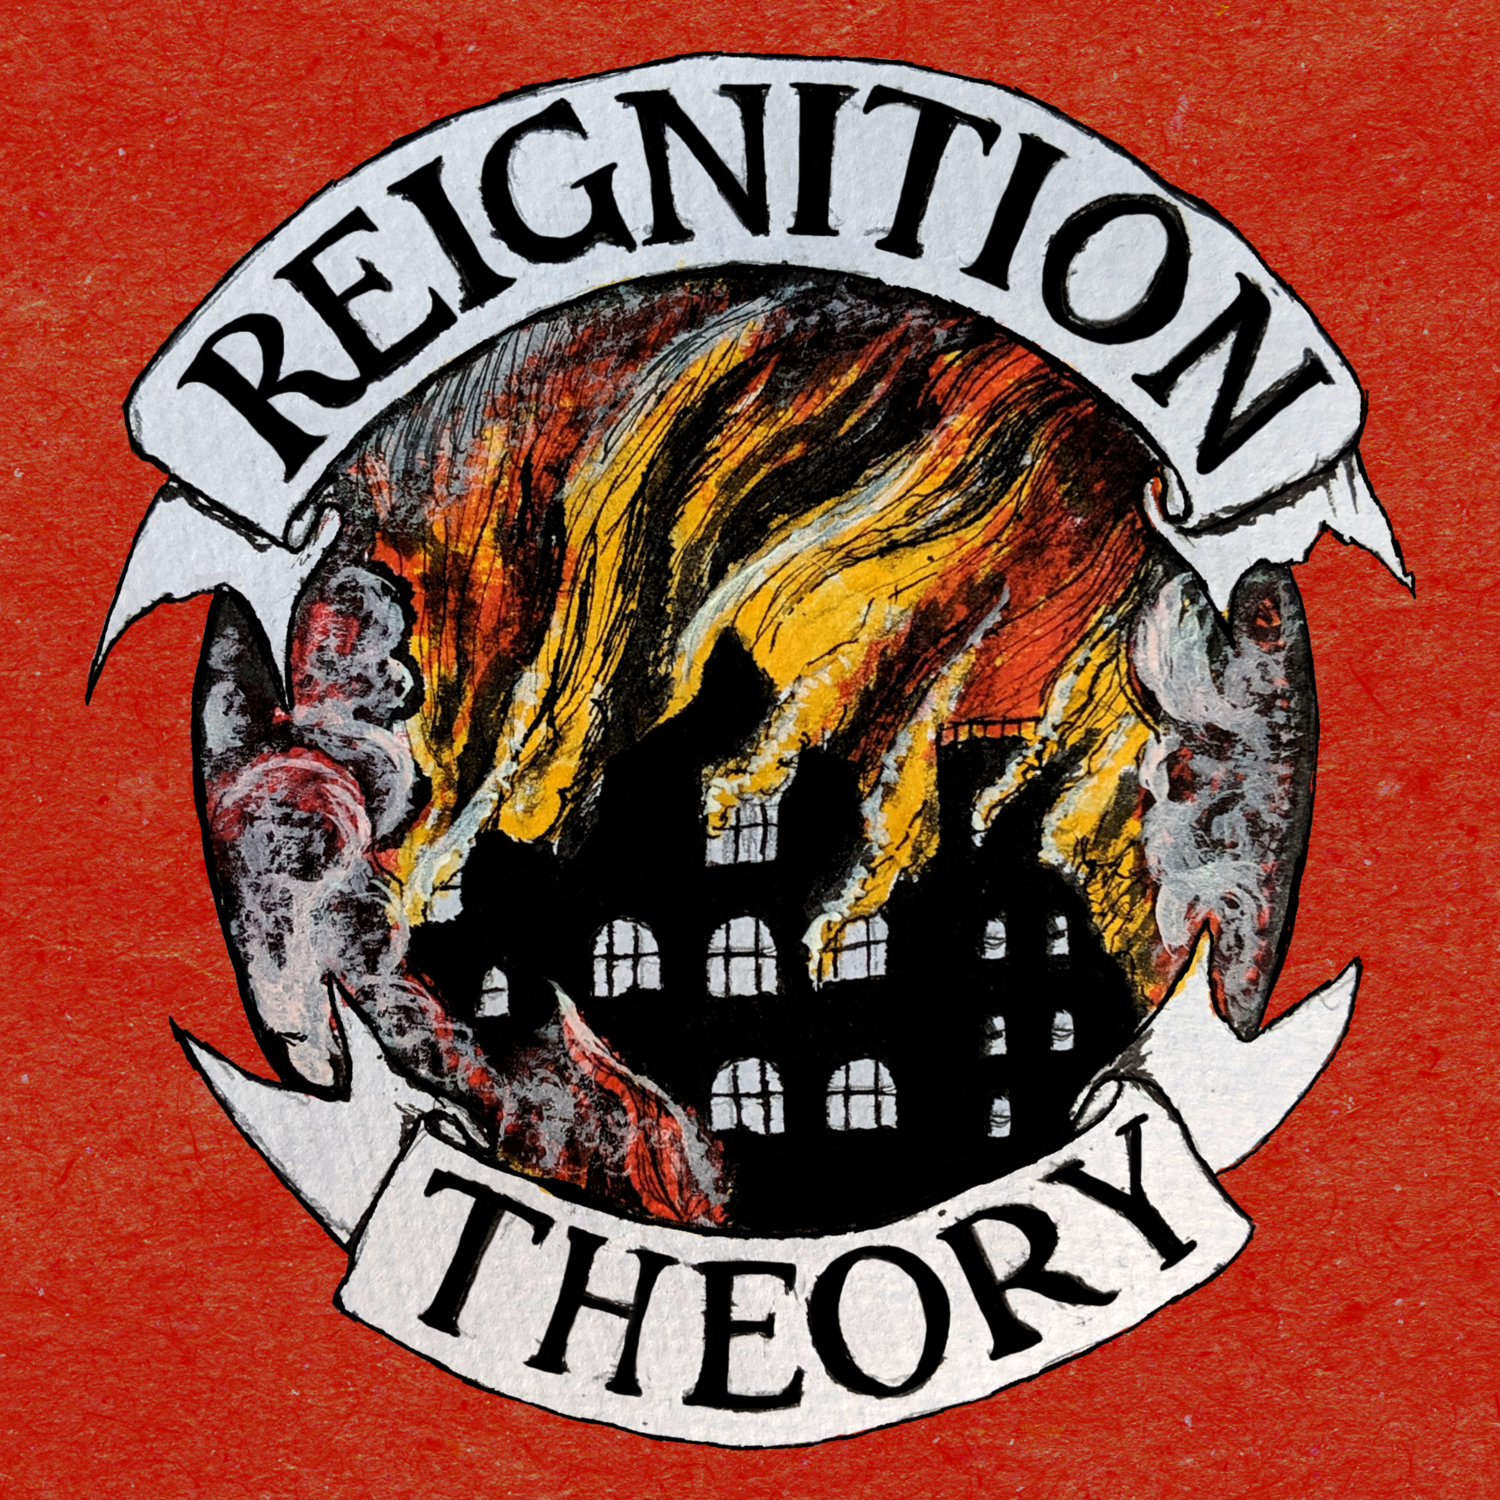 Episode 9 - The Congress - The Reignition Theory